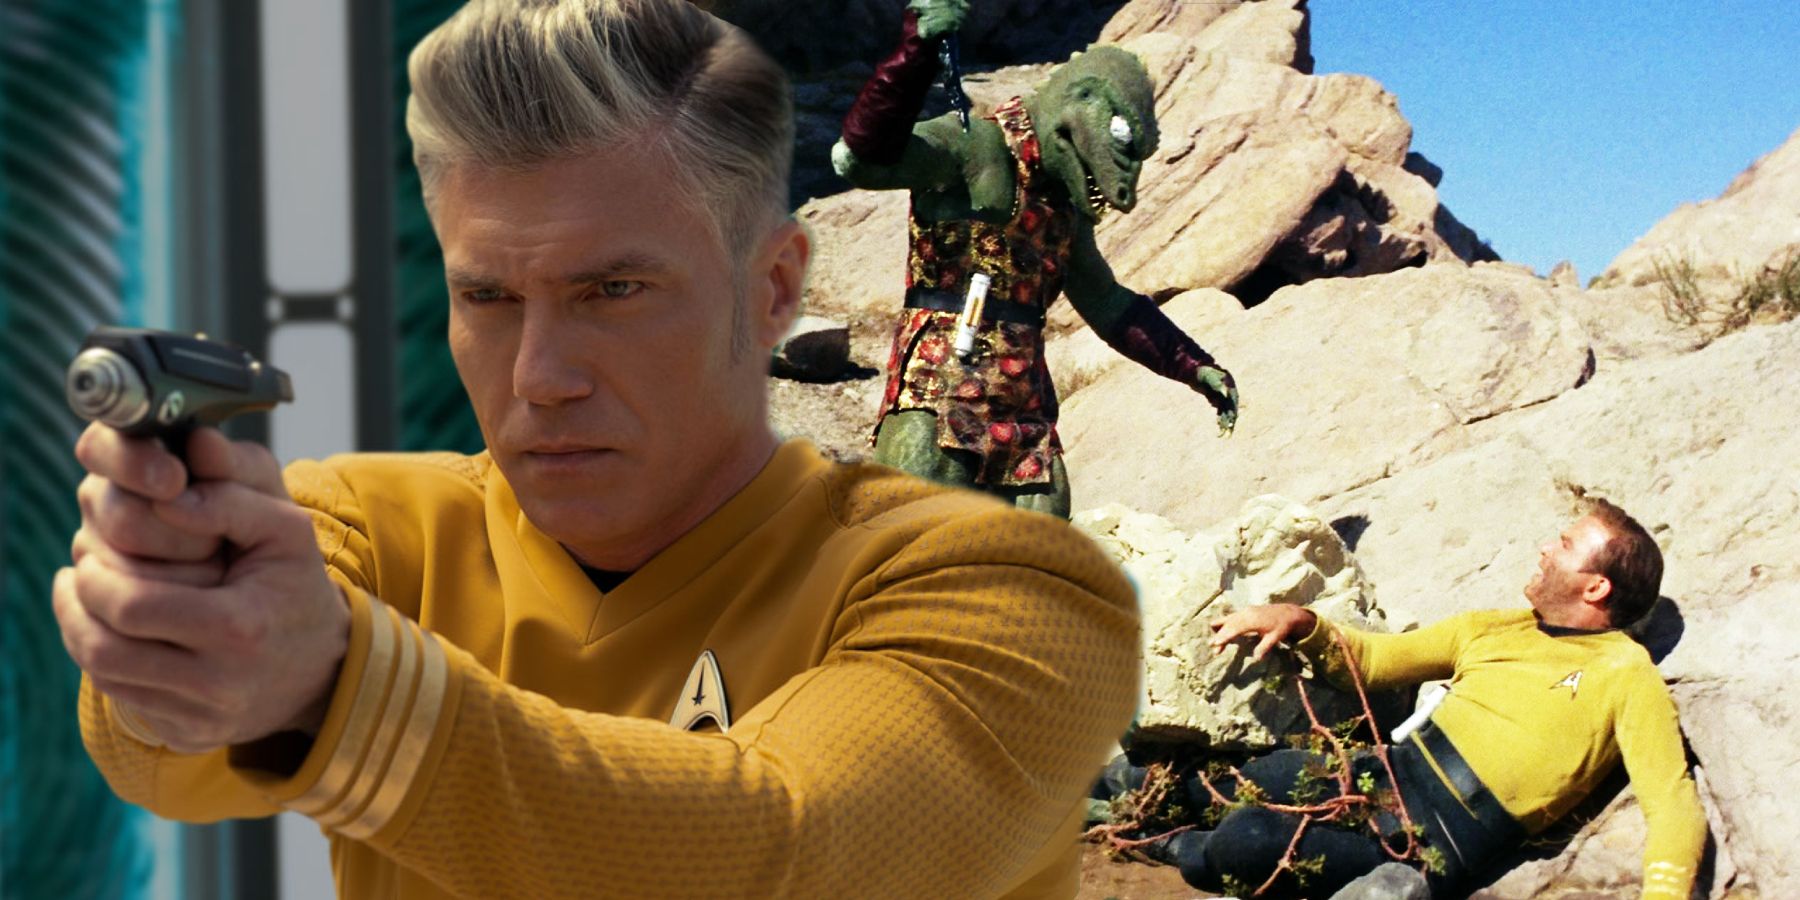 Pike aims a phaser, and Kirk fights a Gorn